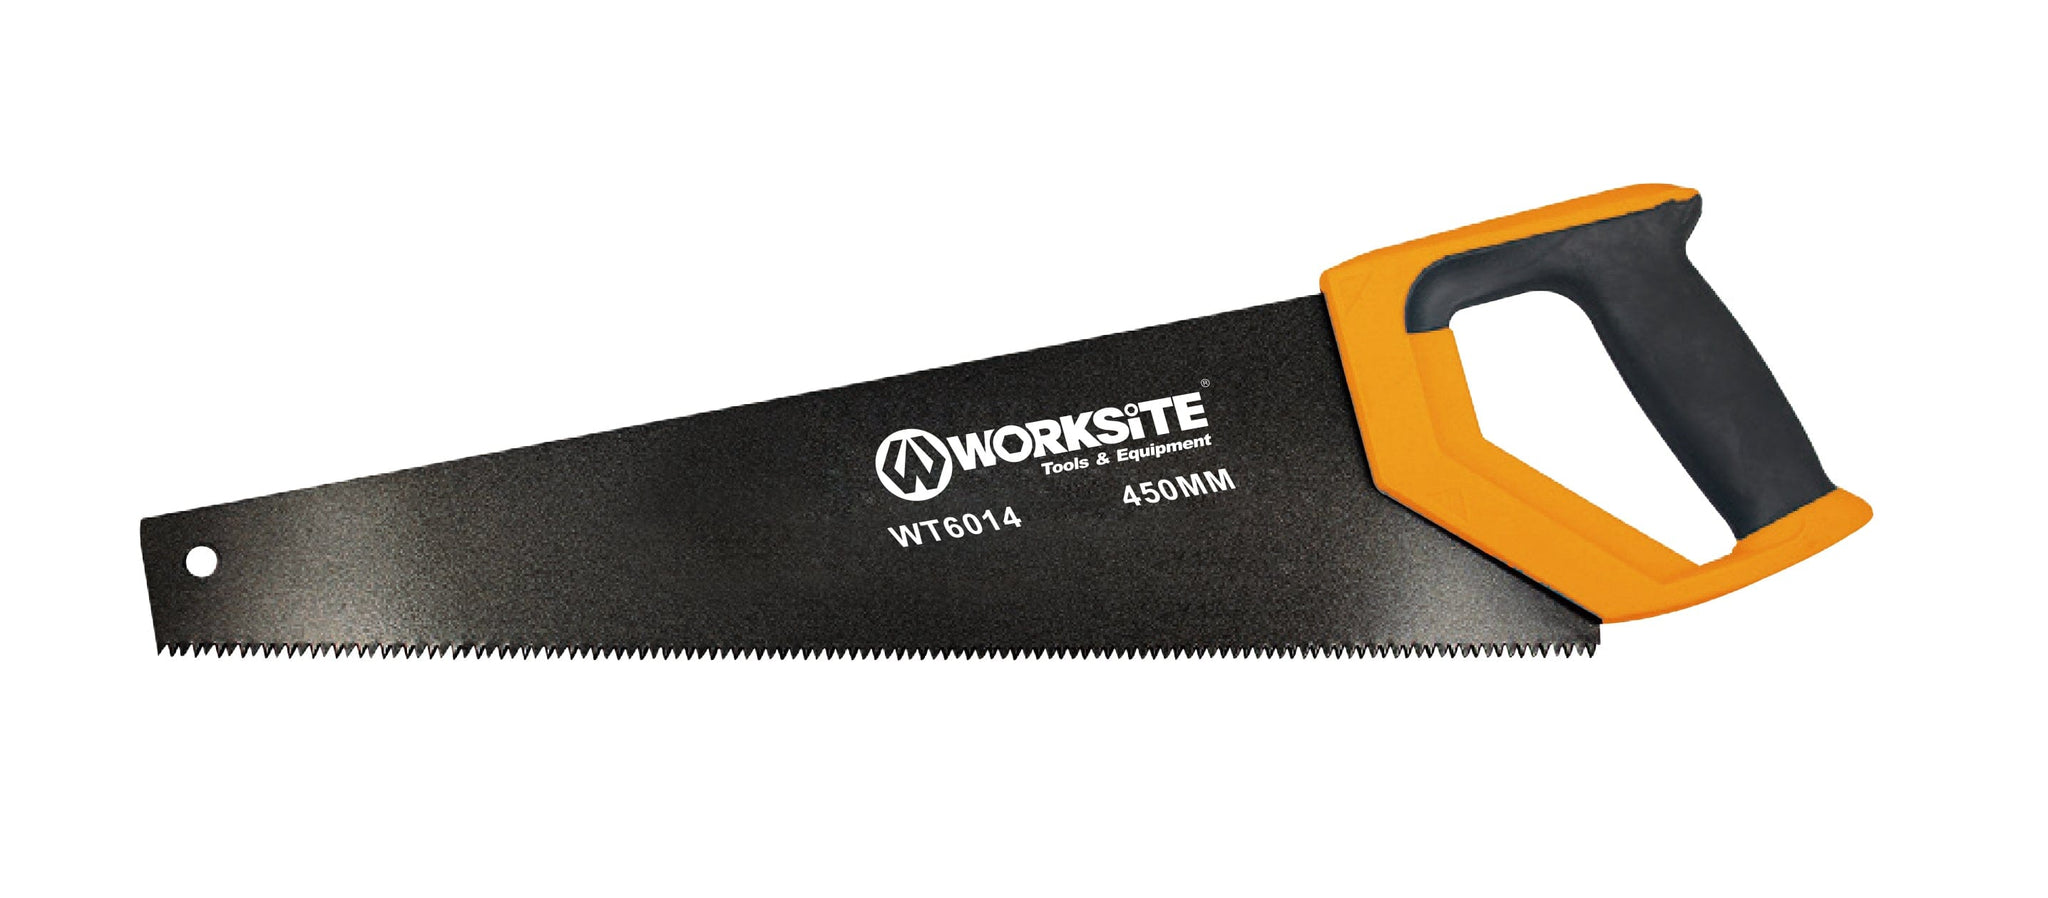 Worksite Hand Saw 18 inches. 3 sided precision ground and induction hardened teeth for easy and perfect cutting. Readily made to accommodate the different situations on the field or on a project.-WT6014